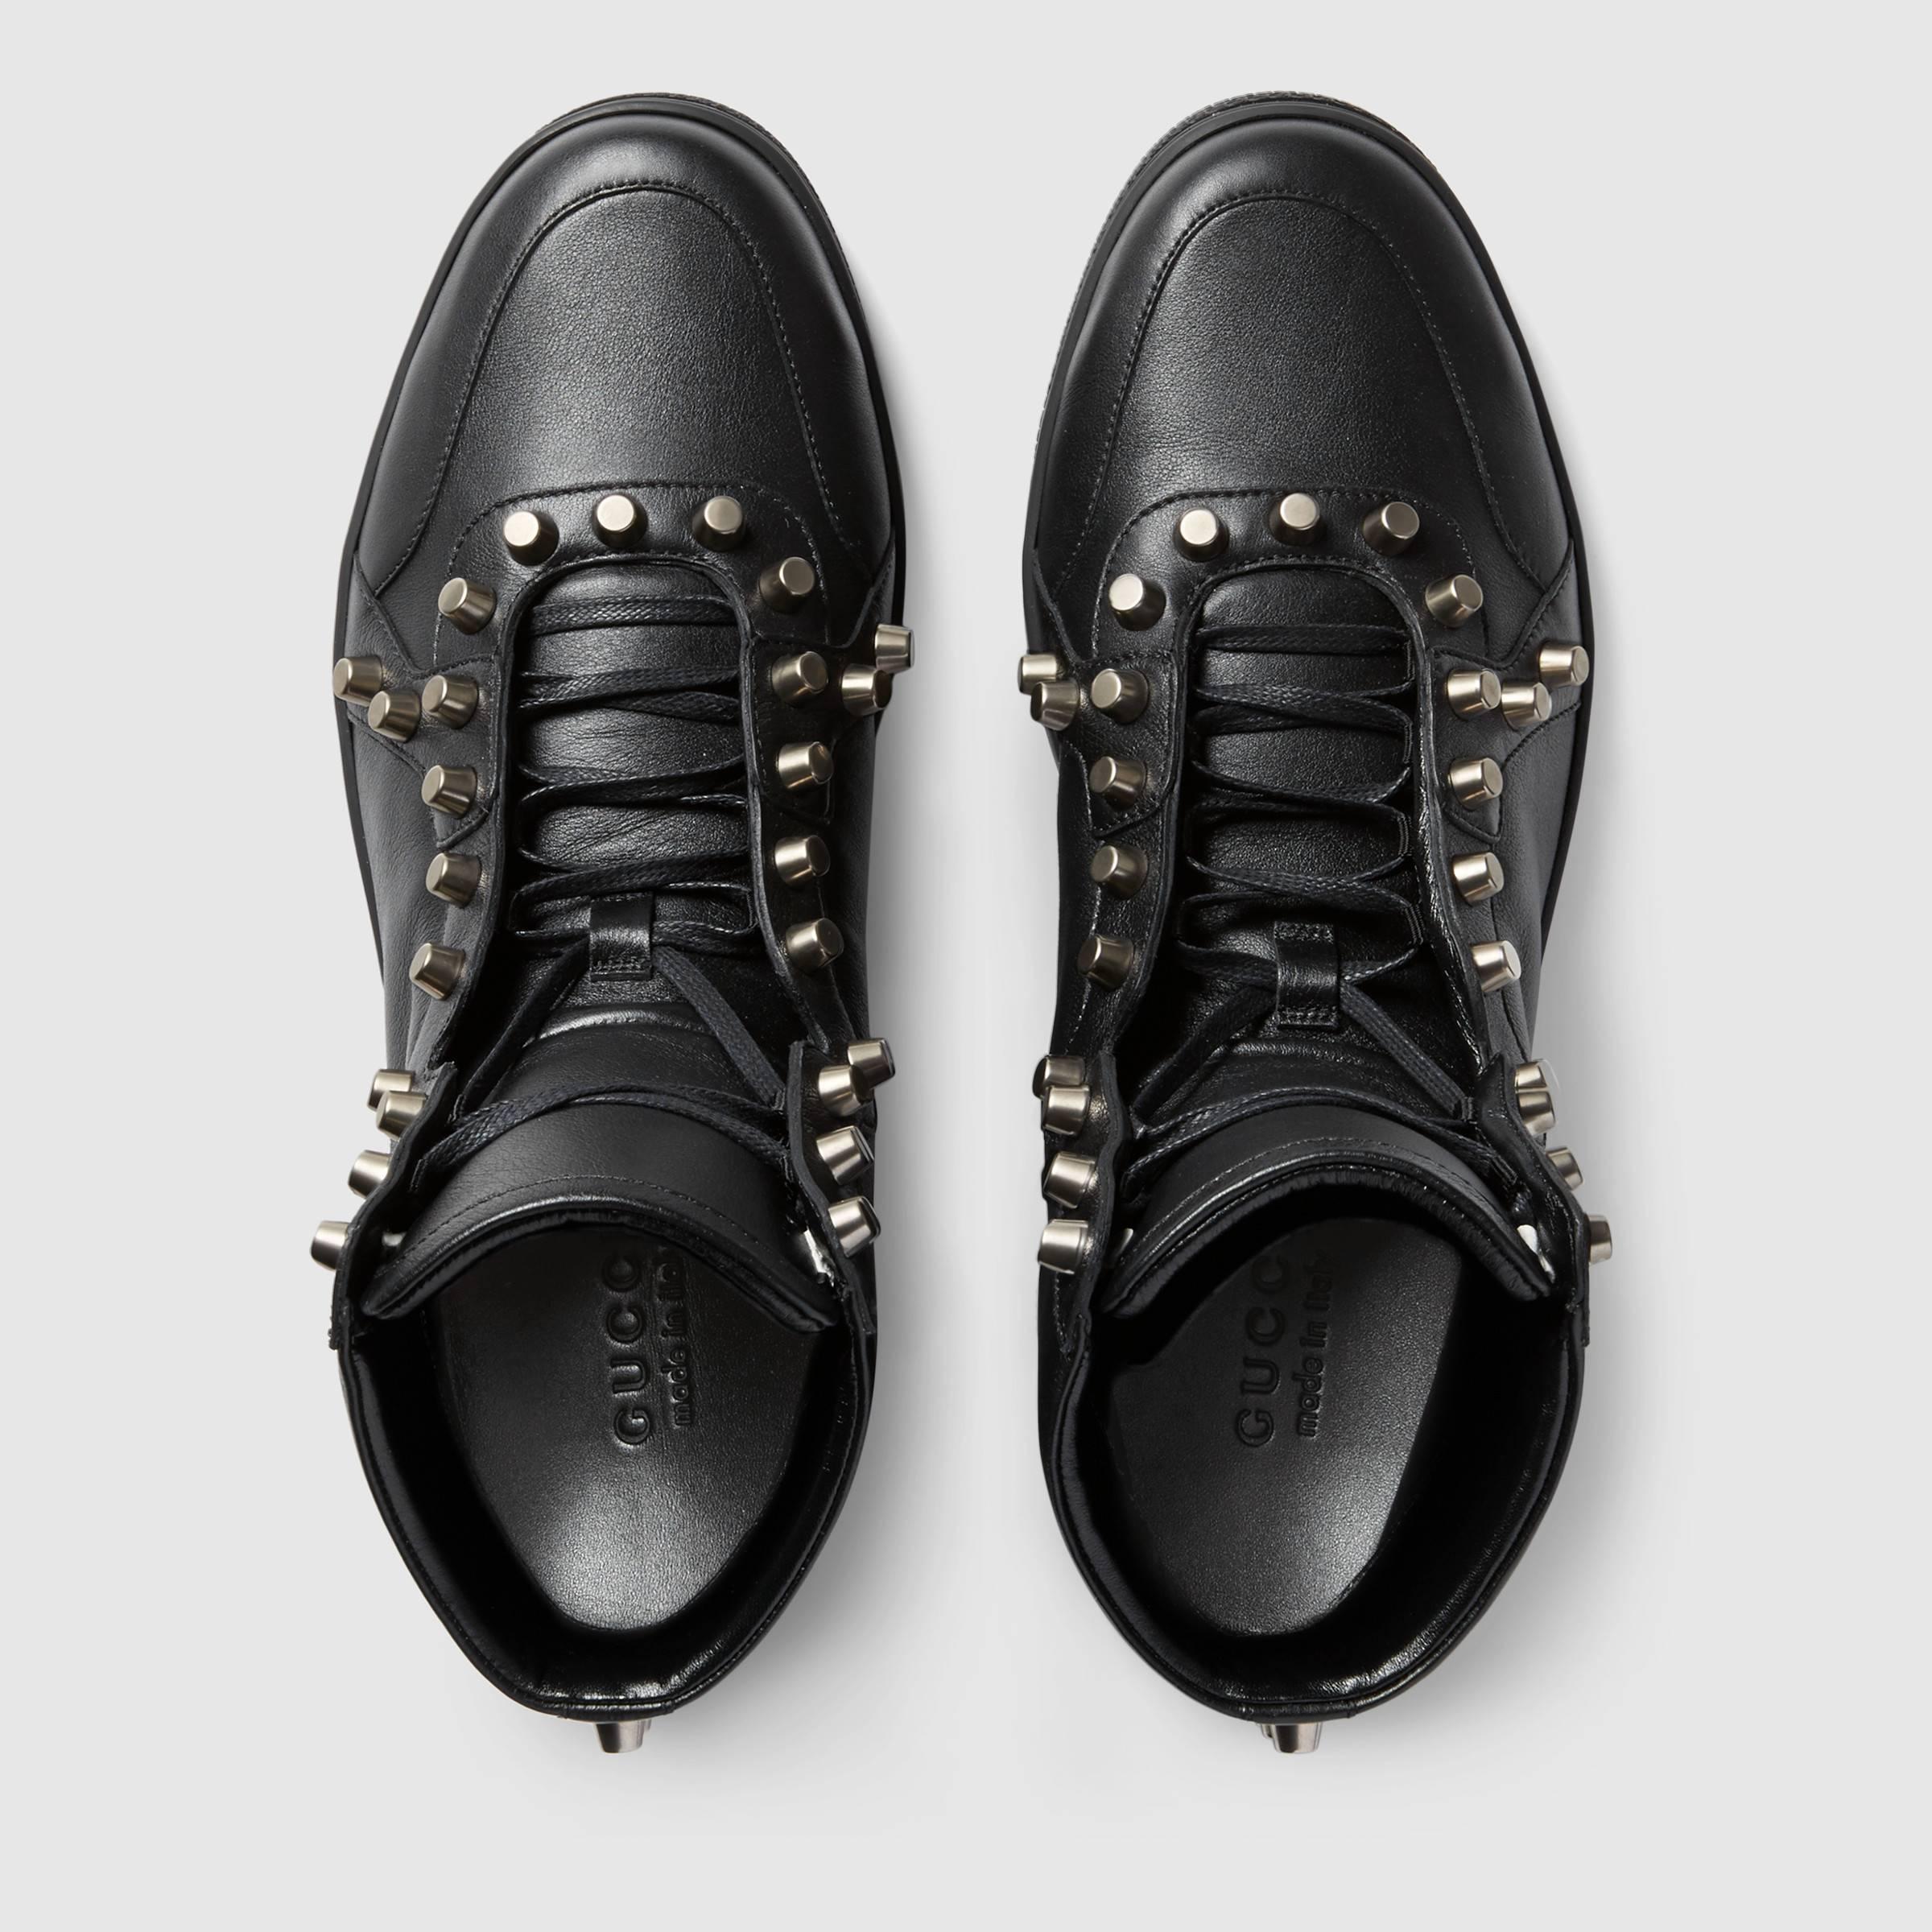 New Gucci Men's Leather Black High-Top Sneakers with Studs
Designer sizes available 7 and 8 / US sizes according to Gucci size guide 8 and 9 ( Italian sizes 41.5 and 42.5 )
Miro soft black leather, Silver-tone metal studs hardware details, Signature